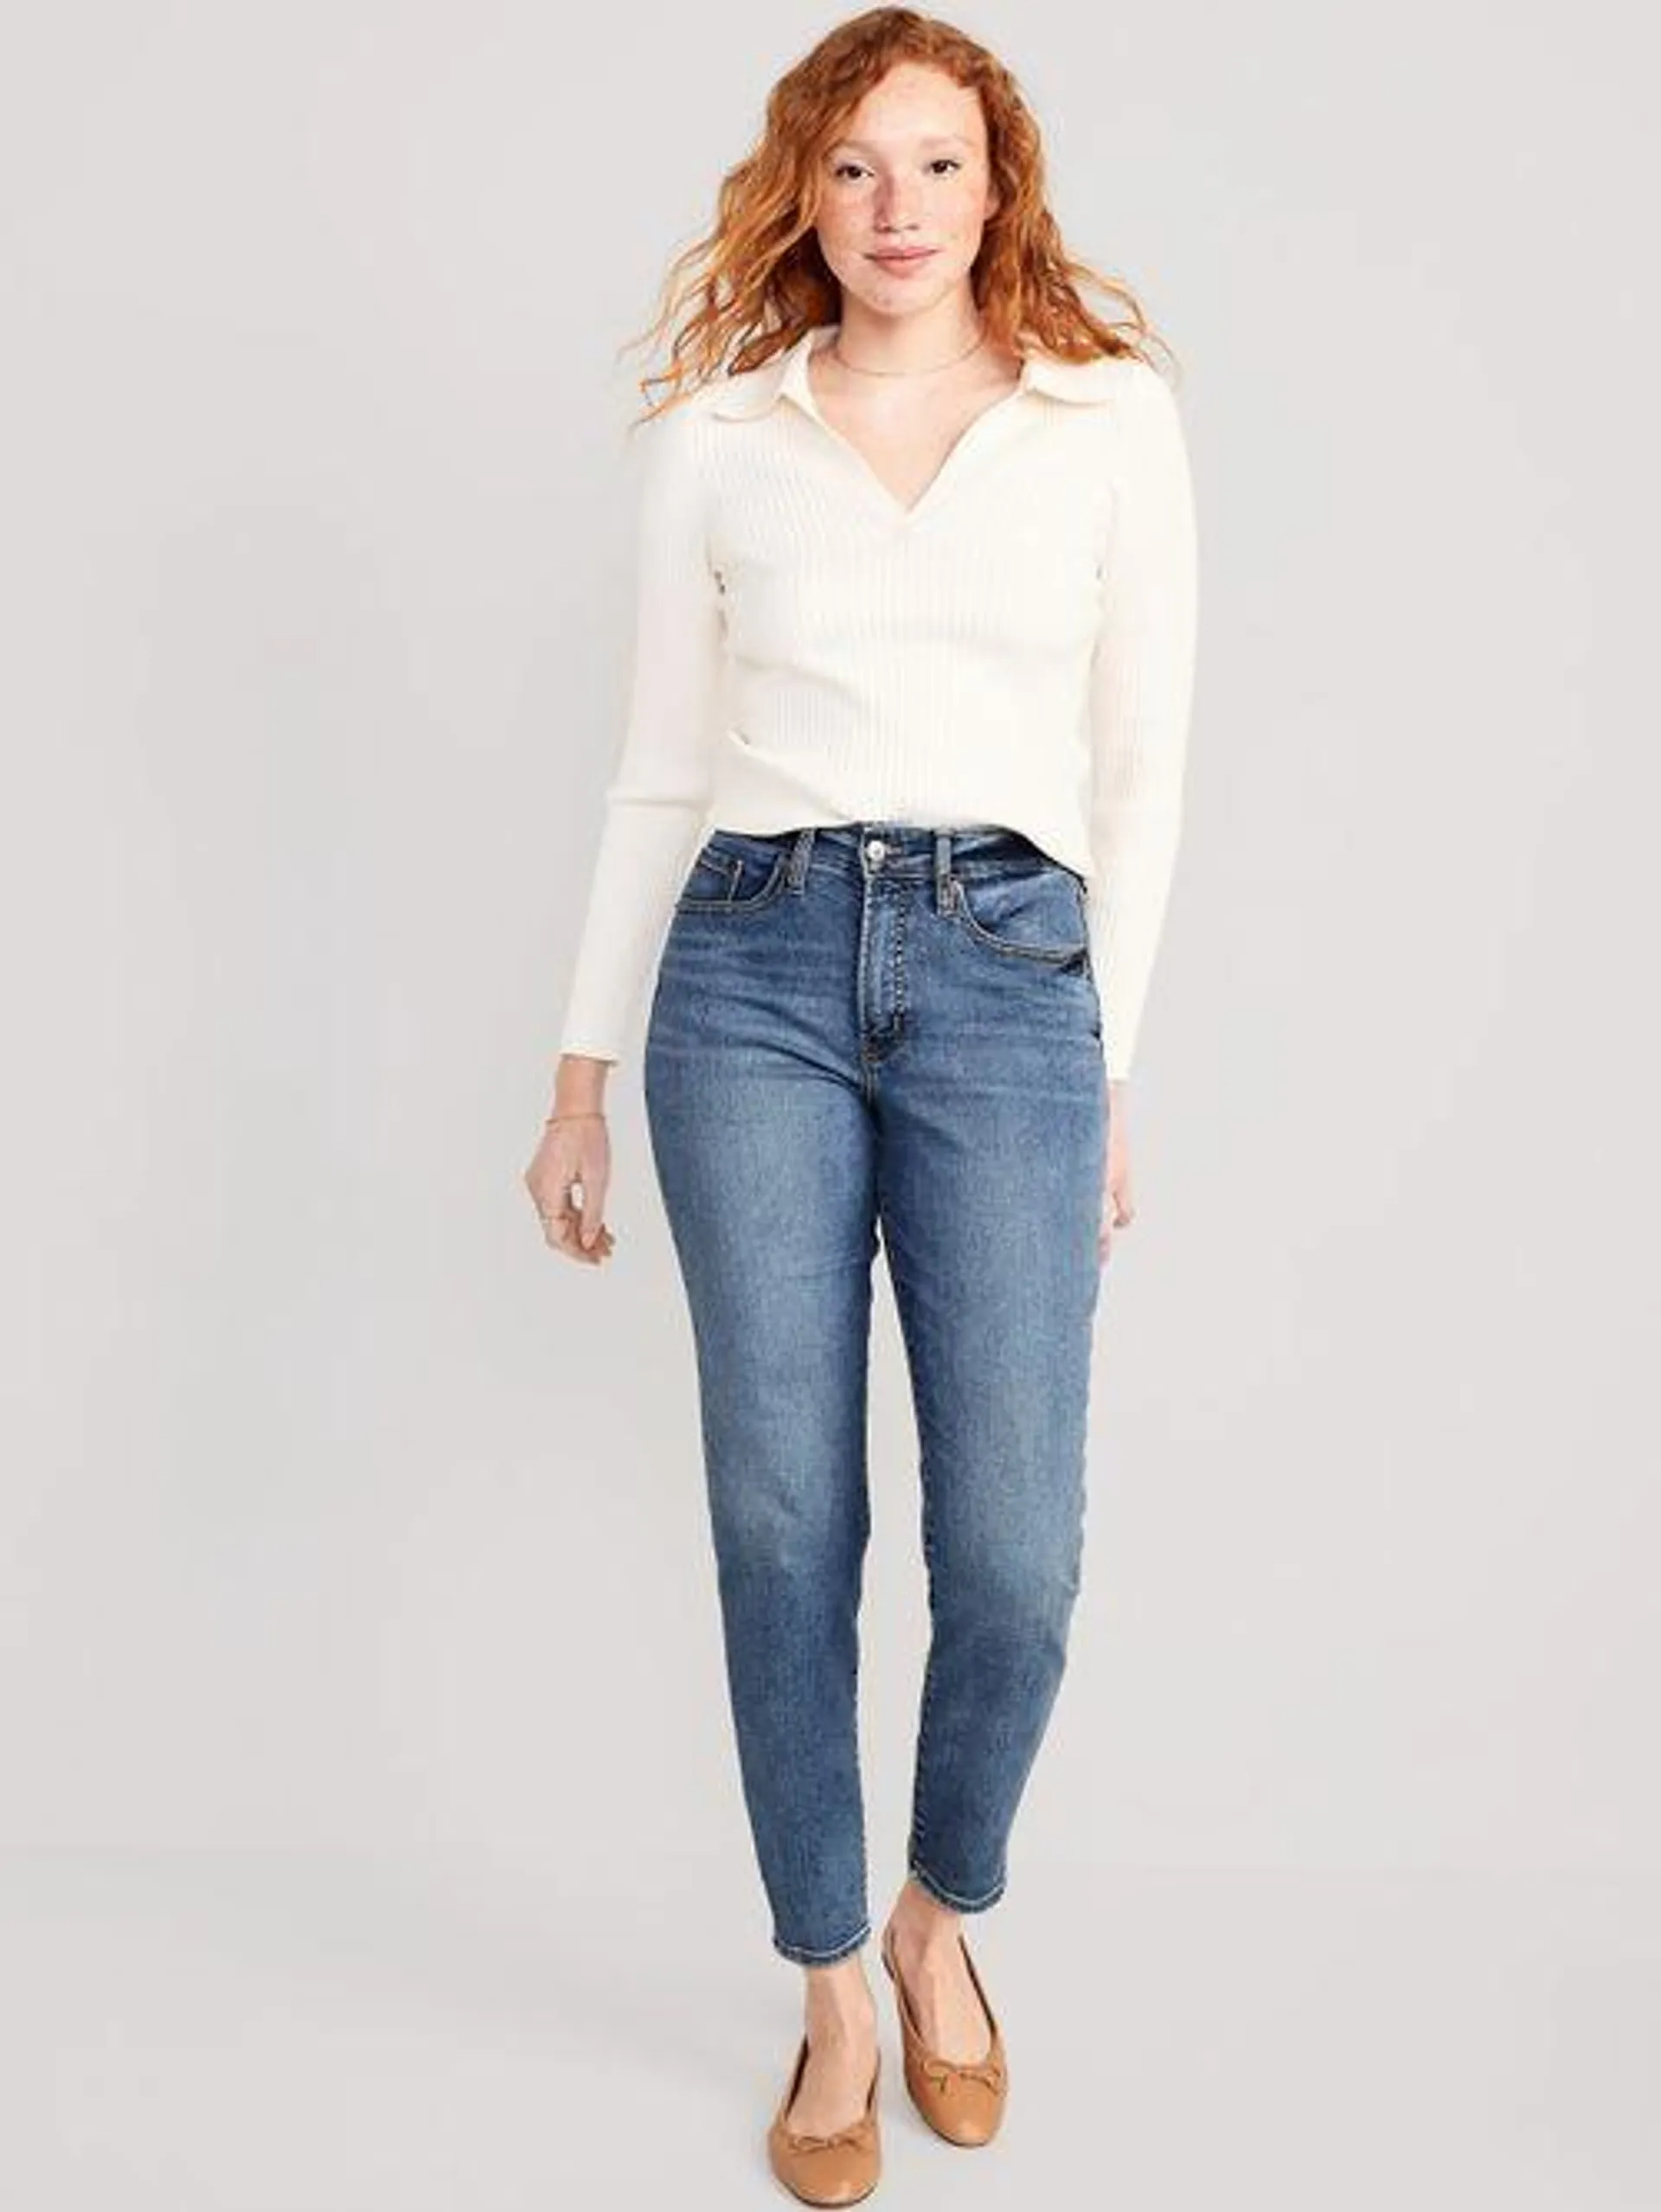 Jeans Old Navy High-Waisted O.G. Straight Ankle para Mujer